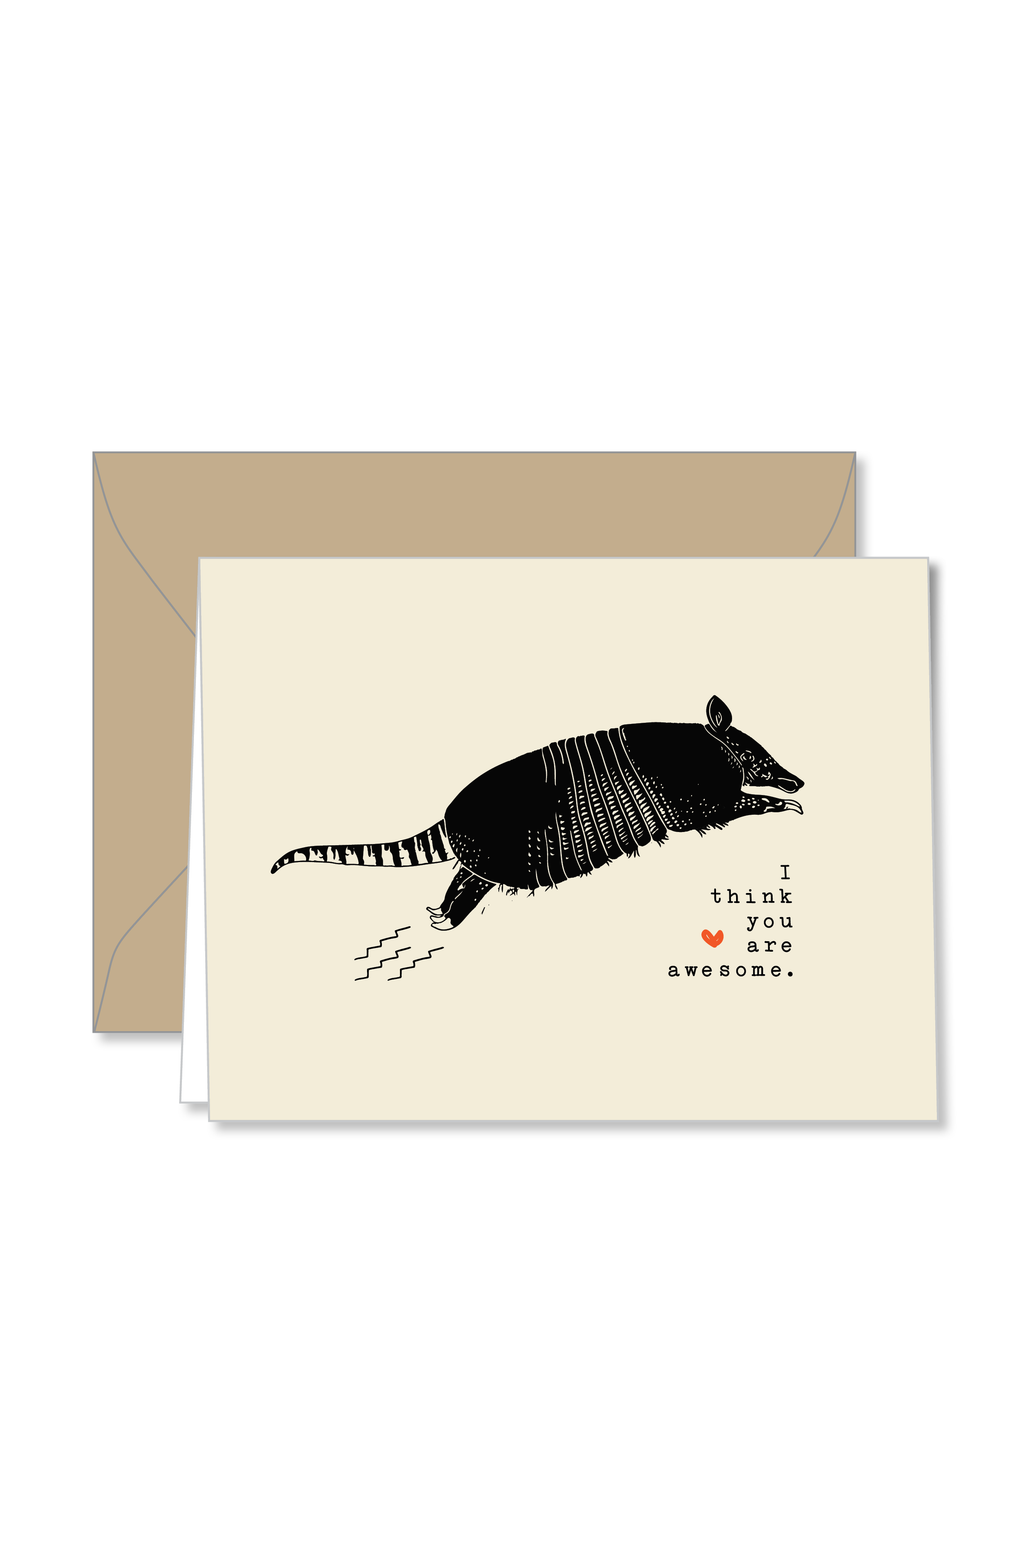 Cream notecard with leaping armadillo design and I think you are awesome text design by Ramble and Co. | you can shop now at  shop.rambleandcompany.com or visit our storefront in downtown Wichita Falls, Texas || small batch + hand printed tees | home goods | paper goods | gifts + more